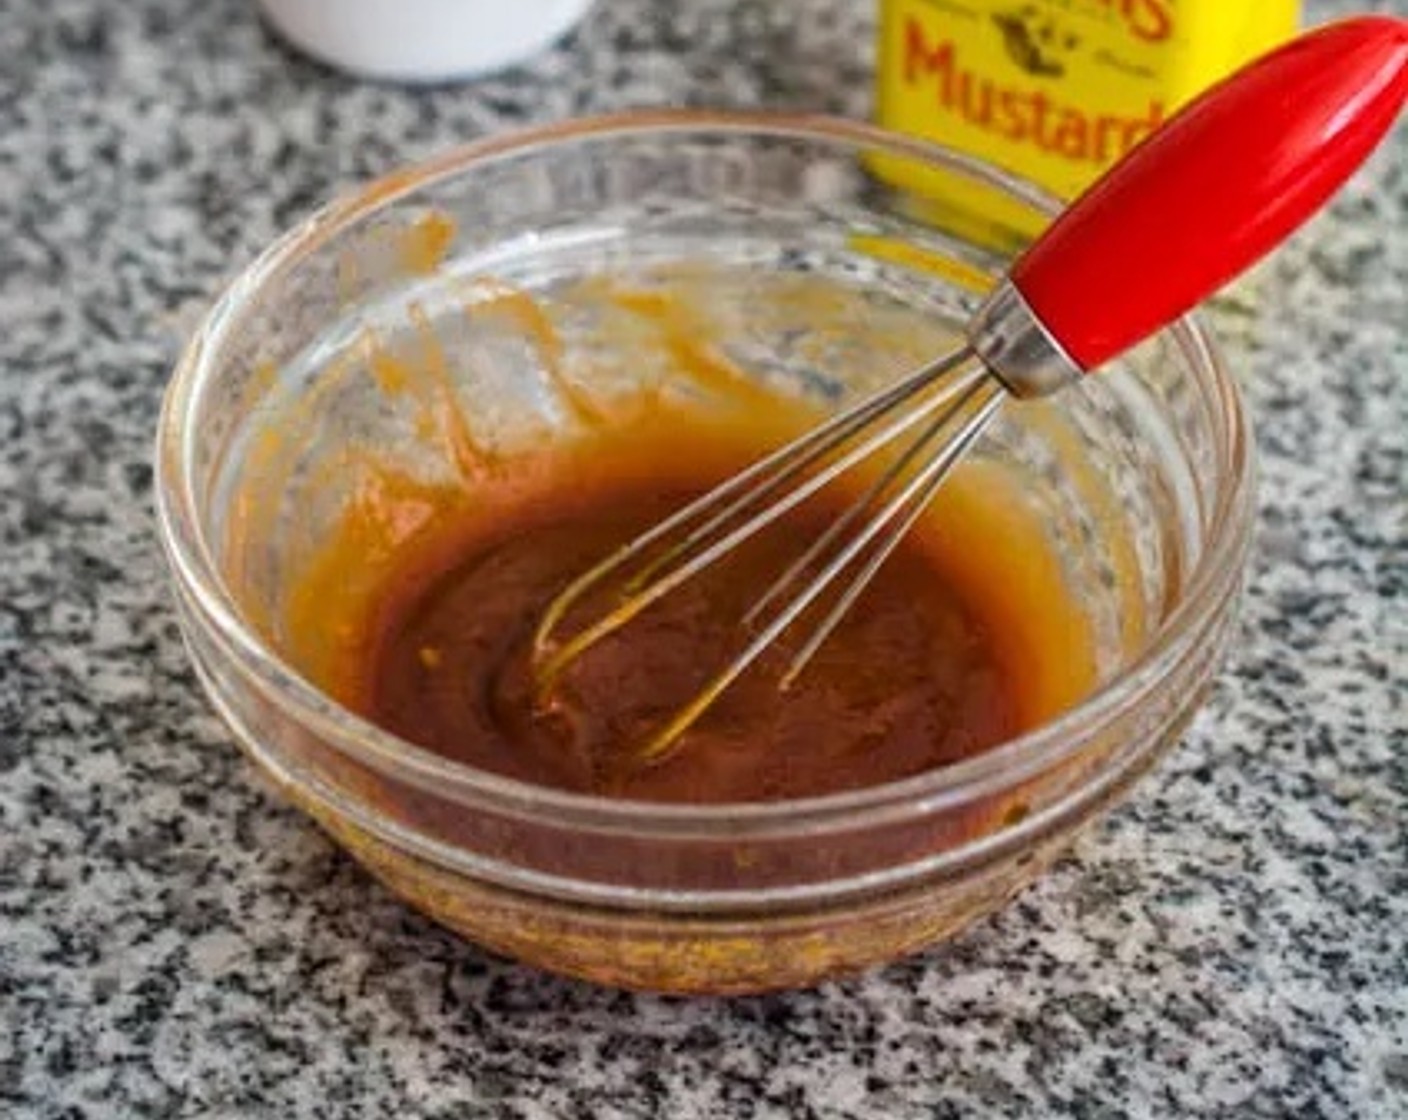 step 8 Prepare the tonkatsu sauce in. a small bowl. Add Ketchup (3 Tbsp), Worcestershire Sauce (1 Tbsp), Oyster Sauce (1/2 Tbsp), and Dry Mustard (1/2 tsp). Mix well.